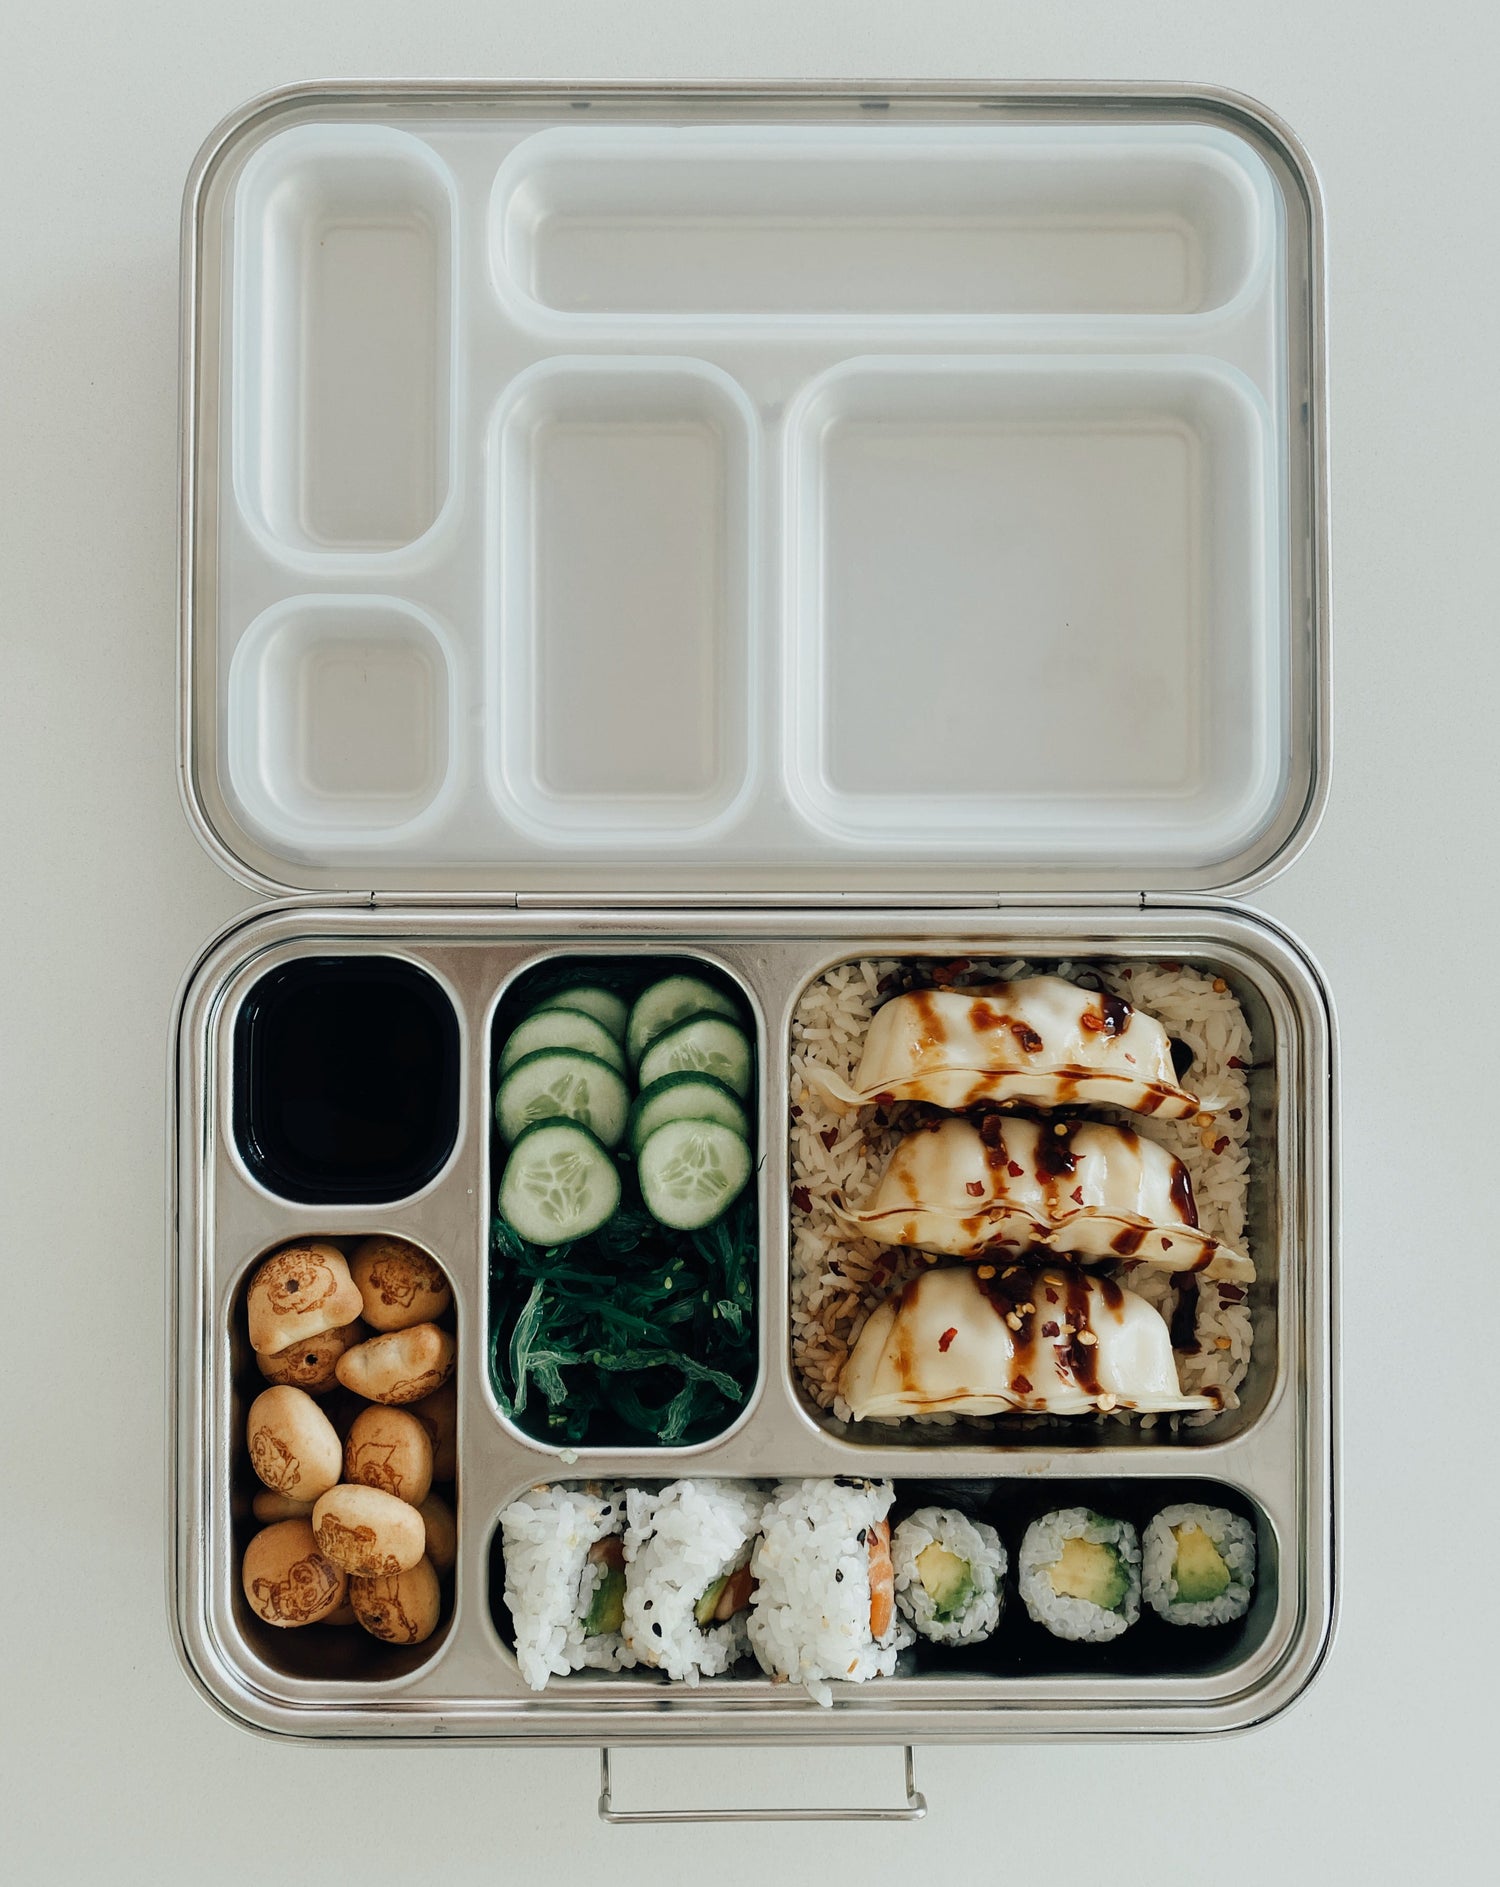 Stainless steel bento box with 5 compartments. Sustainable, eco-friendly, and zero plastic lunchbox alternative. Traditional bento arrangement with sushi, bed of rice, pork gyoza, seaweed salad, pickled cucumber, dipping soy sauce, and chocolate biscuit treats.